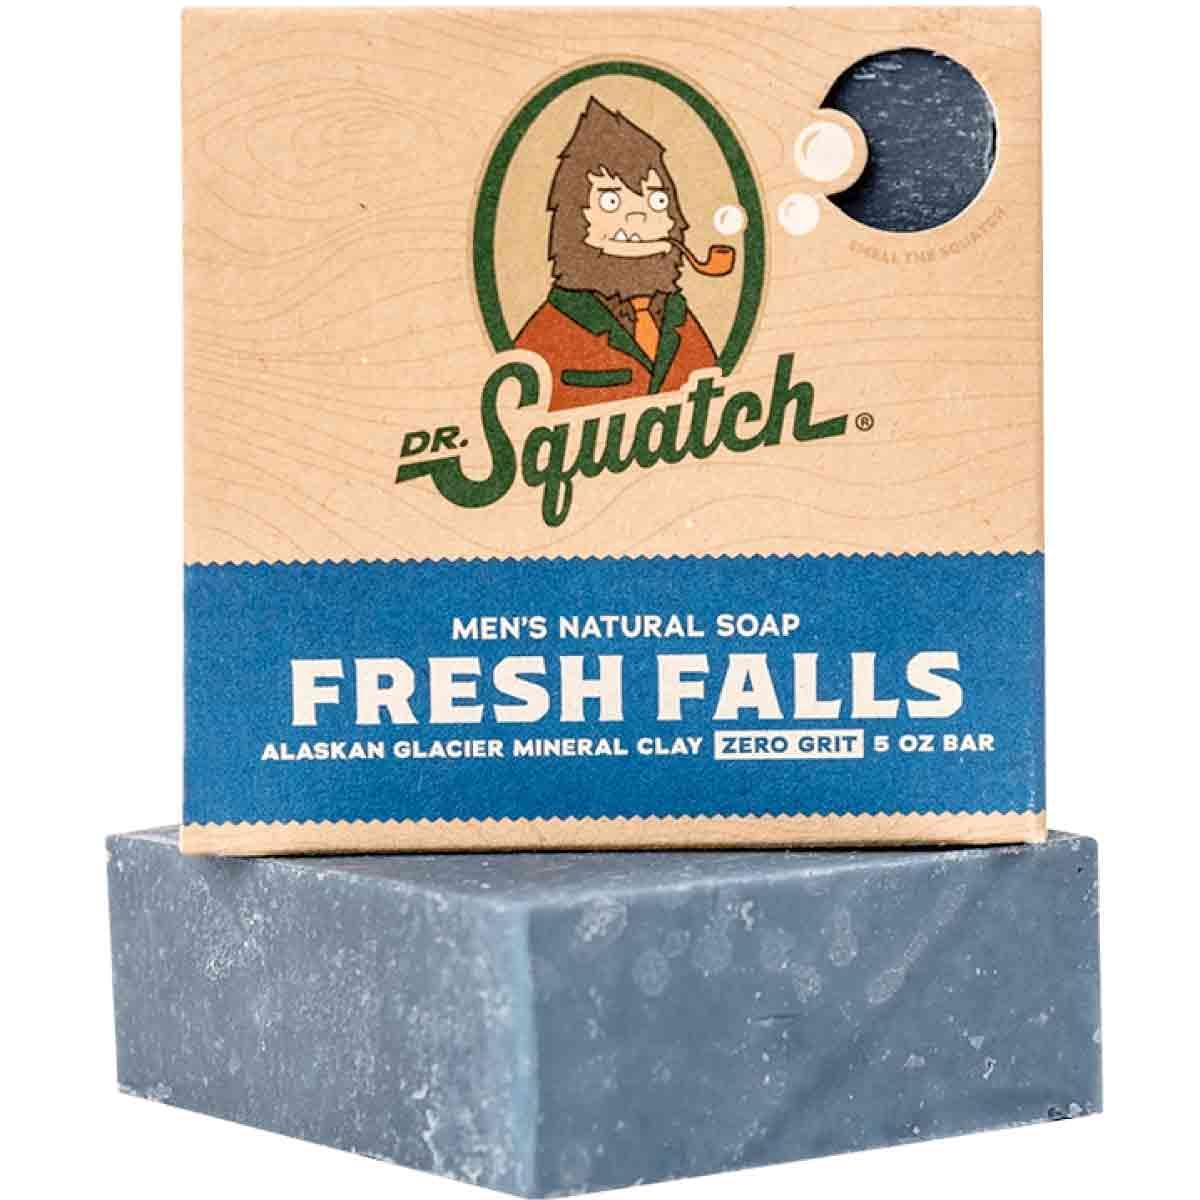 DR. SQUATCH SPIDEY SUDS REVIEW!! 